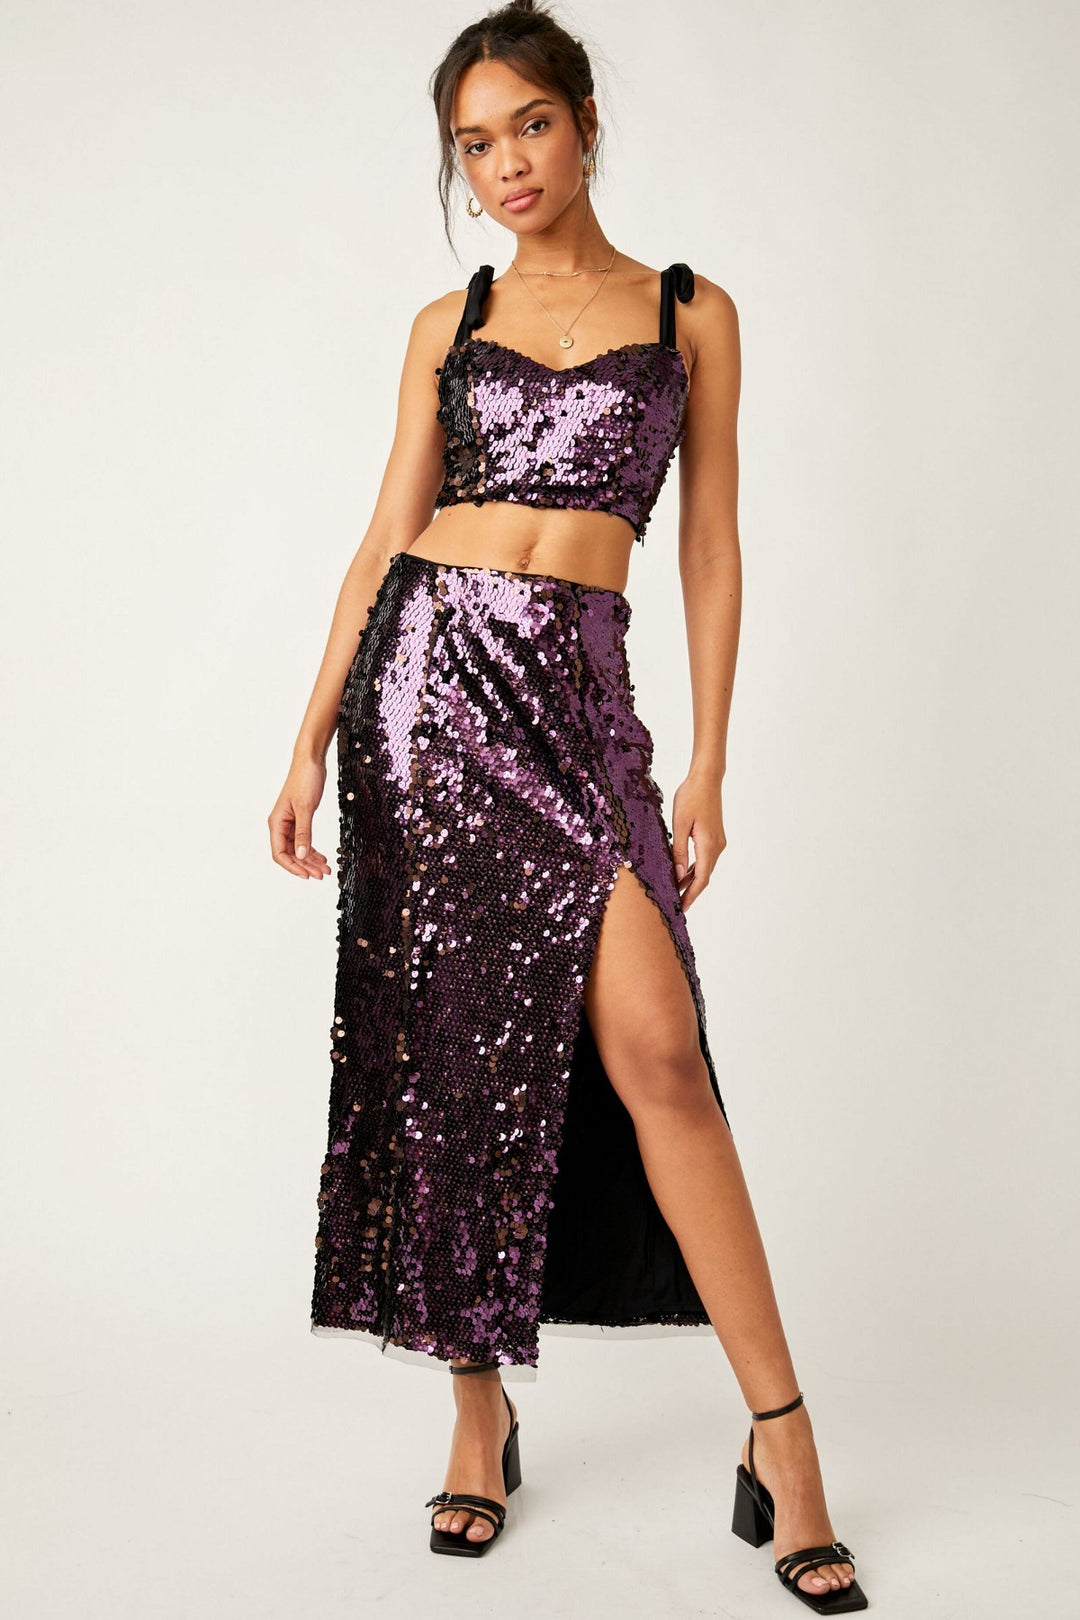 Feel the glam in this star bright sequined maxi skirt! The side slit gives your look a flirty flair and the zipper closure ensures you're party ready. Sparkle all night long in this swoon-worthy skirt!